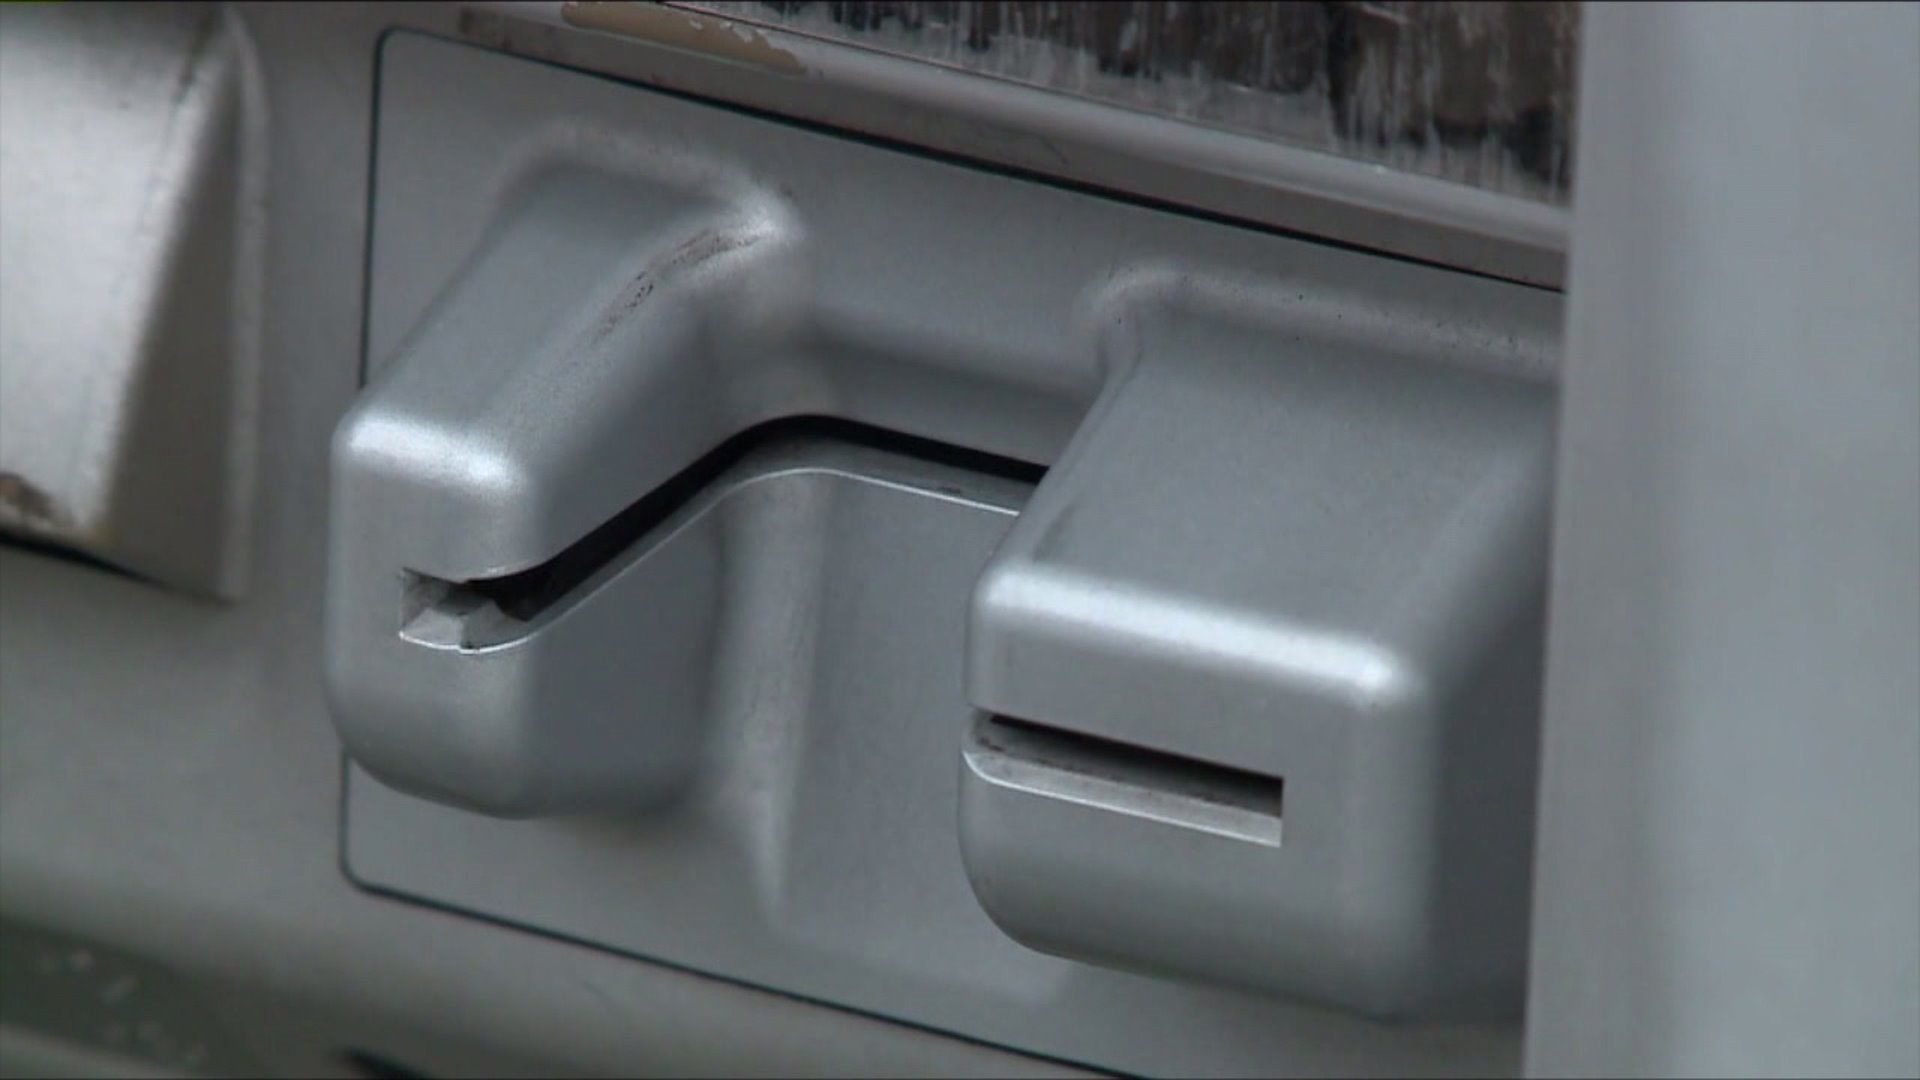 Card Skimming Scam in Luzerne County